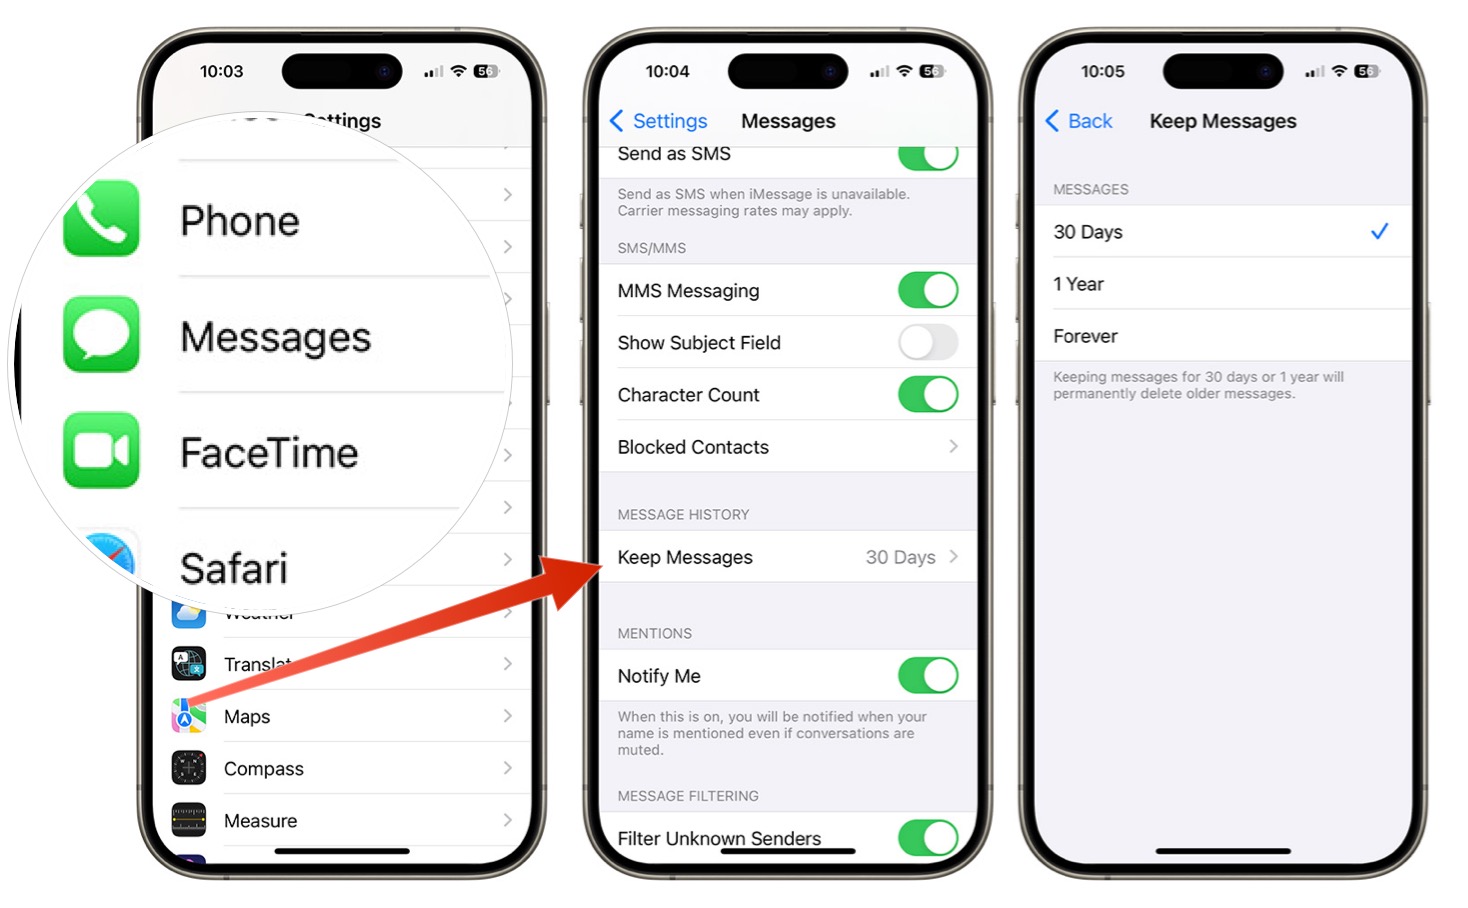 Screenshots showing how to delete messages on iPhone.